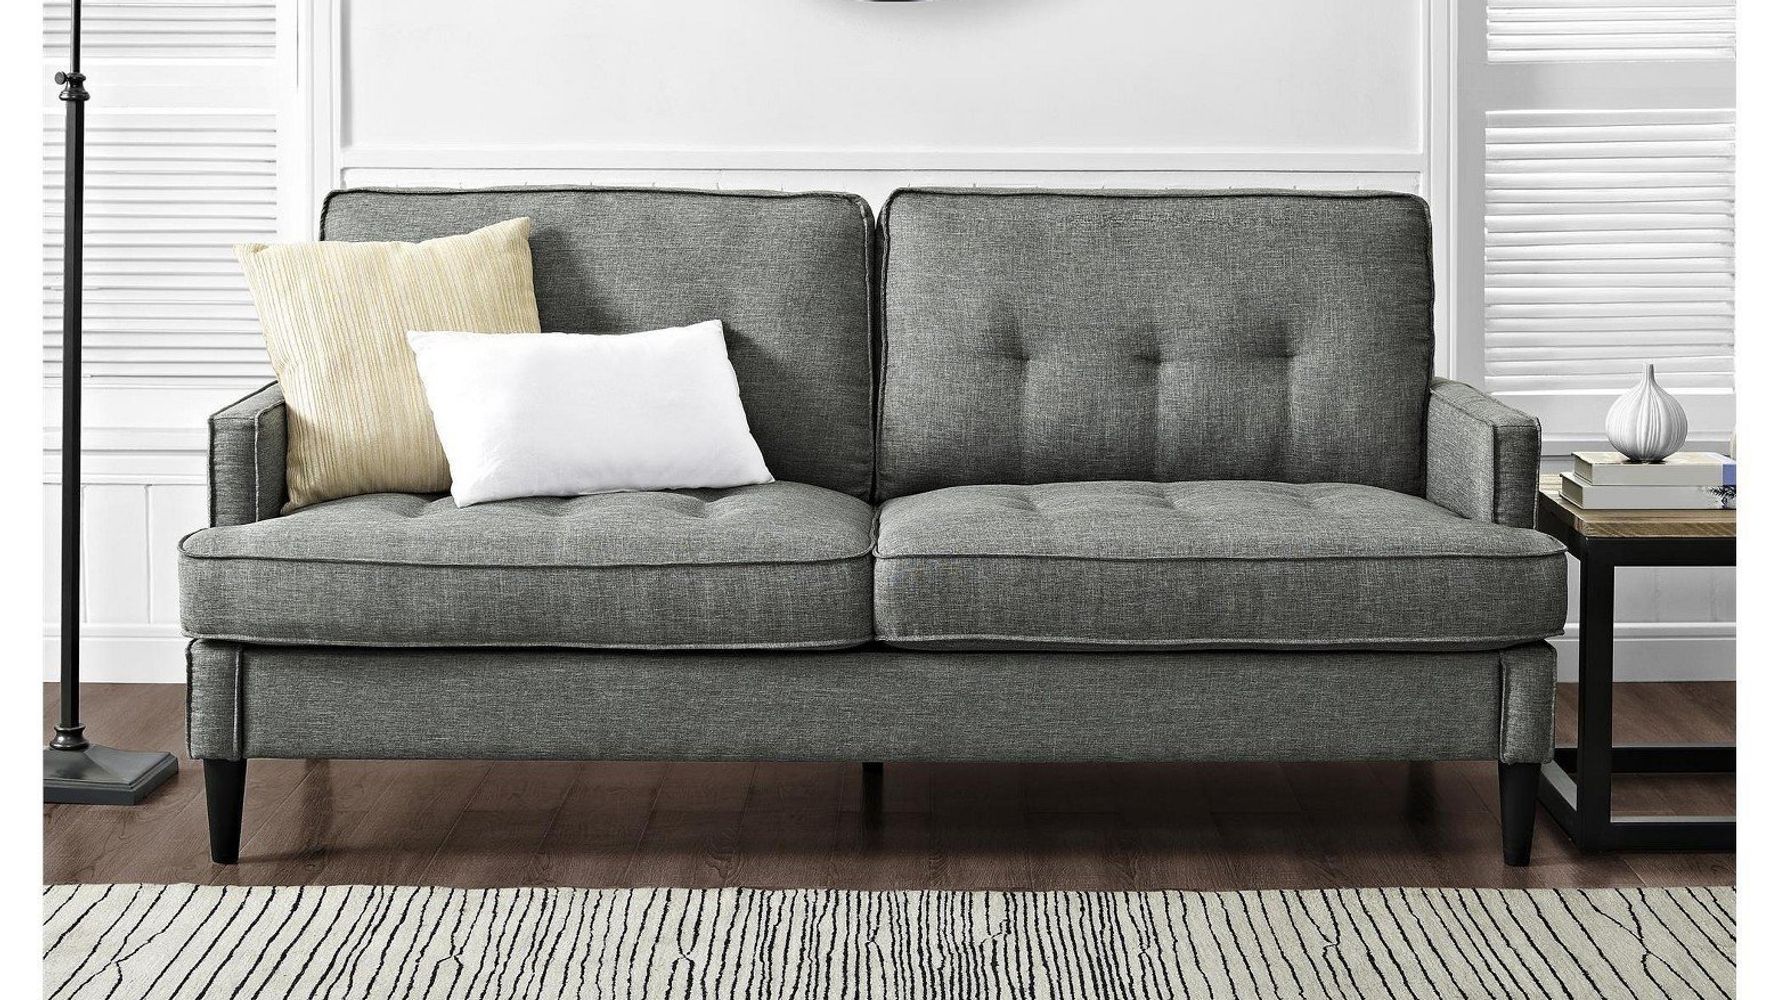 12 Couches For Small Spaces That Are Actually Roomy | Huffpost Life